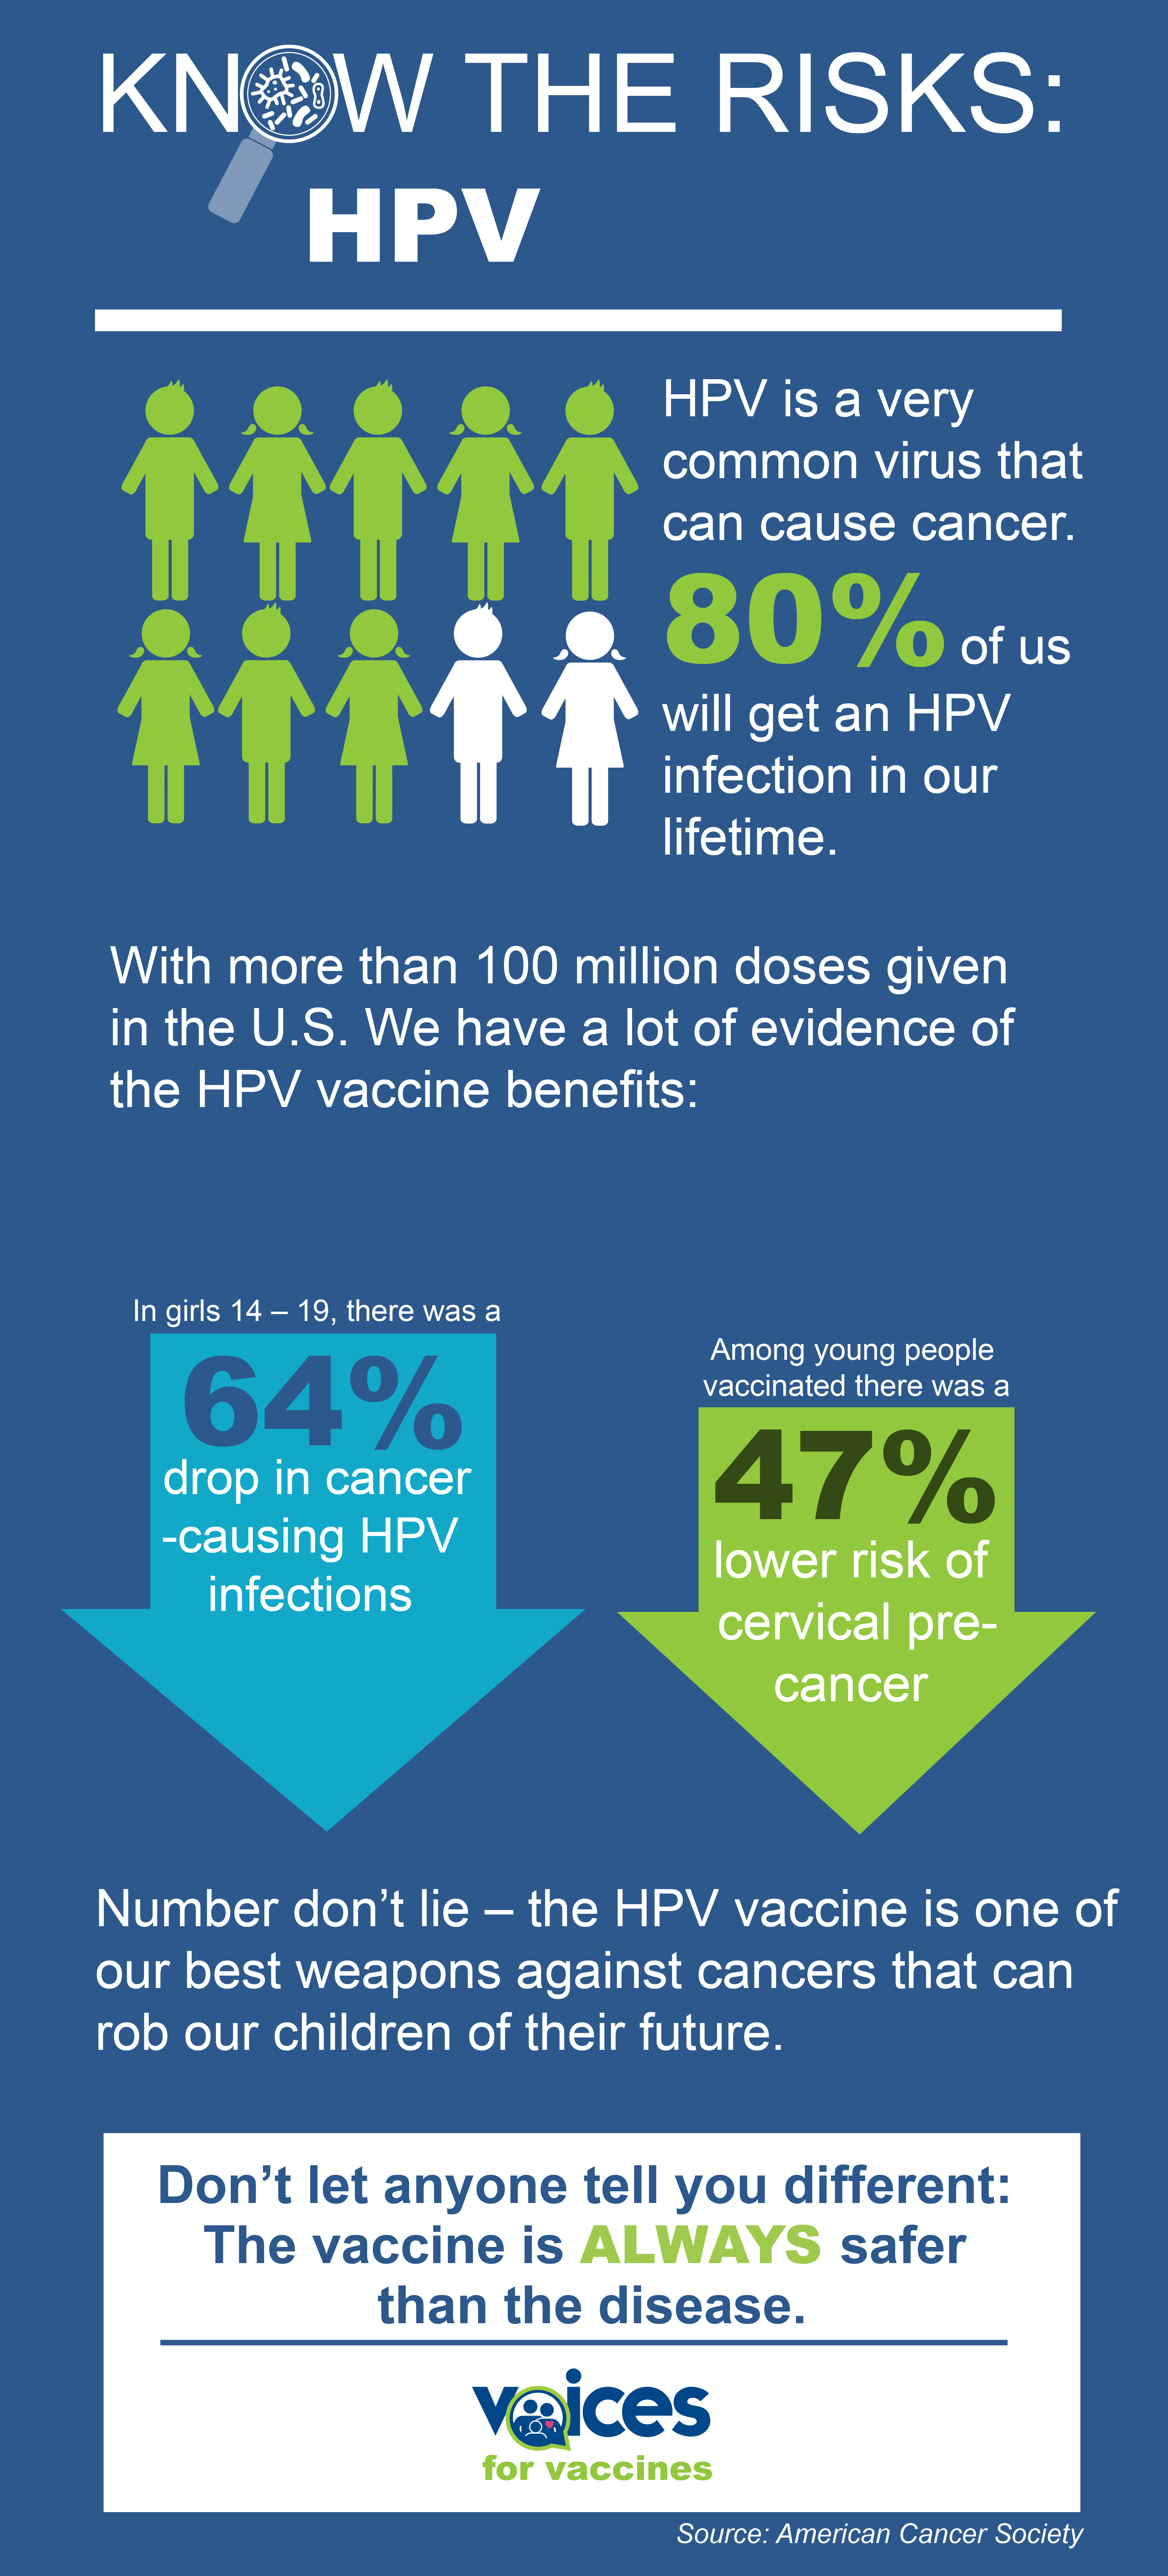 HPV vaccine is a great success story in our battle against cancer. In the 6 years after vaccination started: 64% drop in cancer-causing HPV infections (in girls 14 – 19) 47% lower risk of cervical pre-cancer (among young people vaccinated) Number don’t lie – the HPV vaccine is one of our best weapons against cancers that can rob our children of their future.